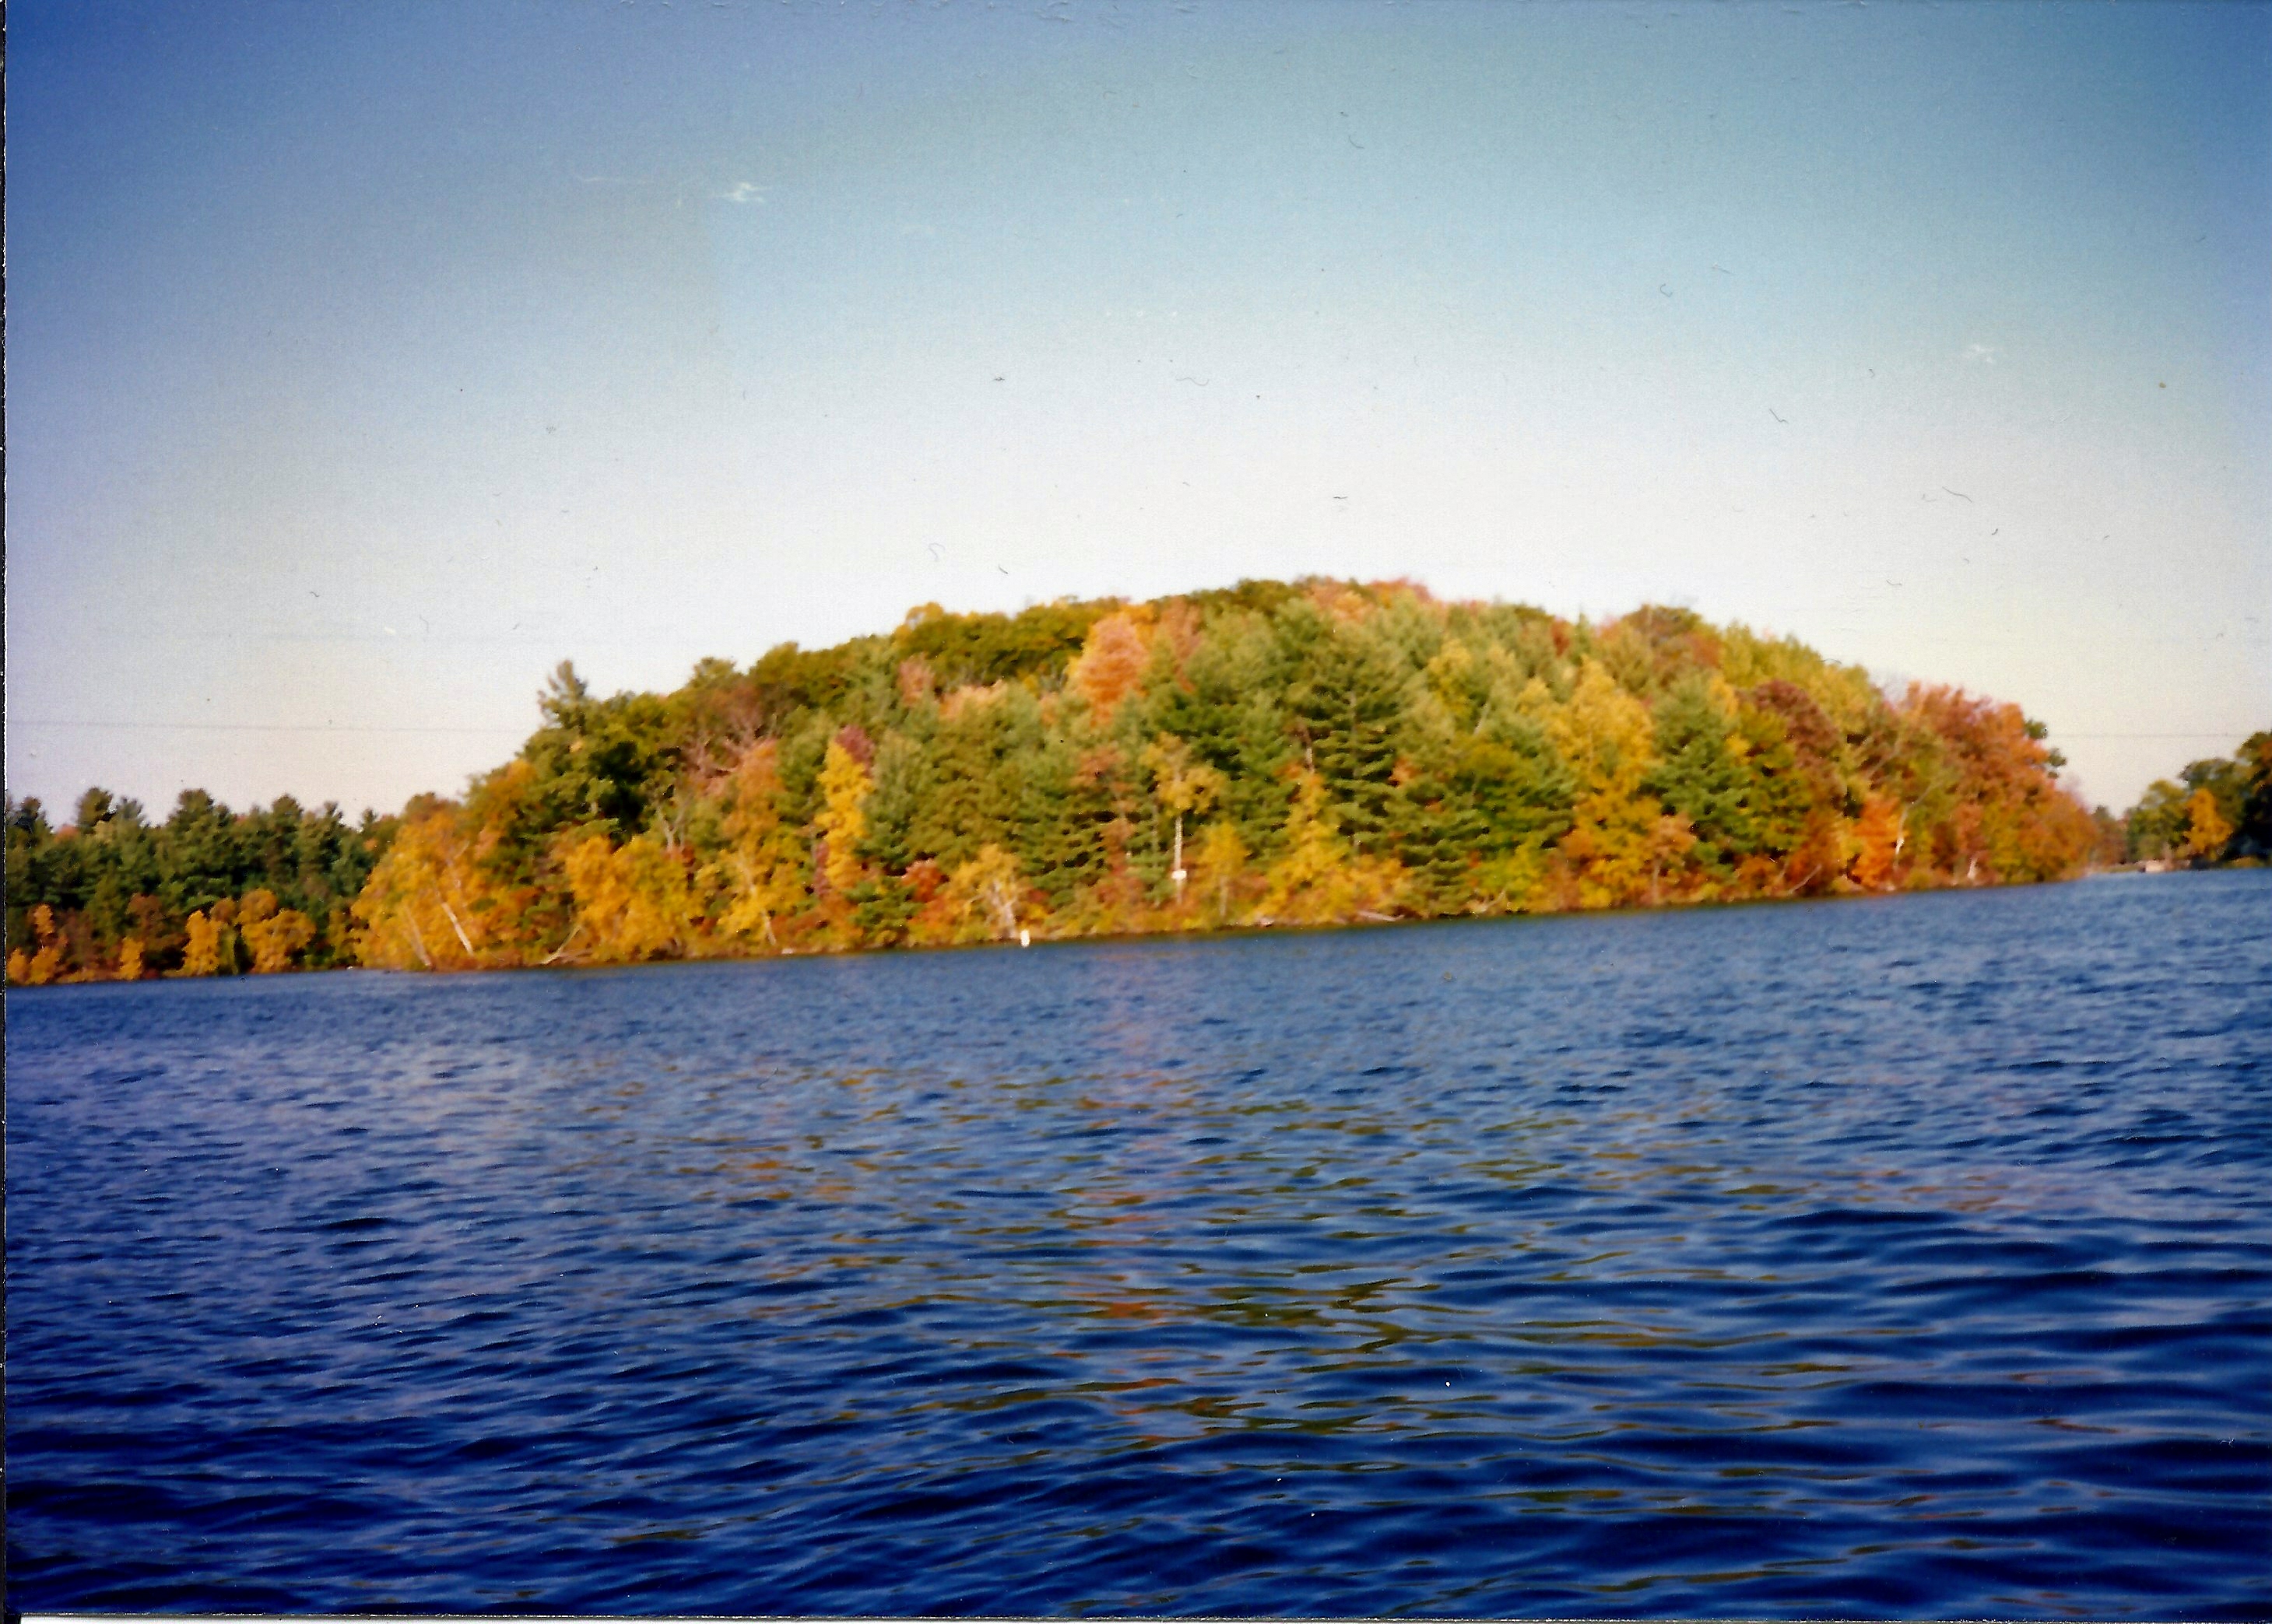 Government Island on Rainbow Lake on The Chain O' Lakes